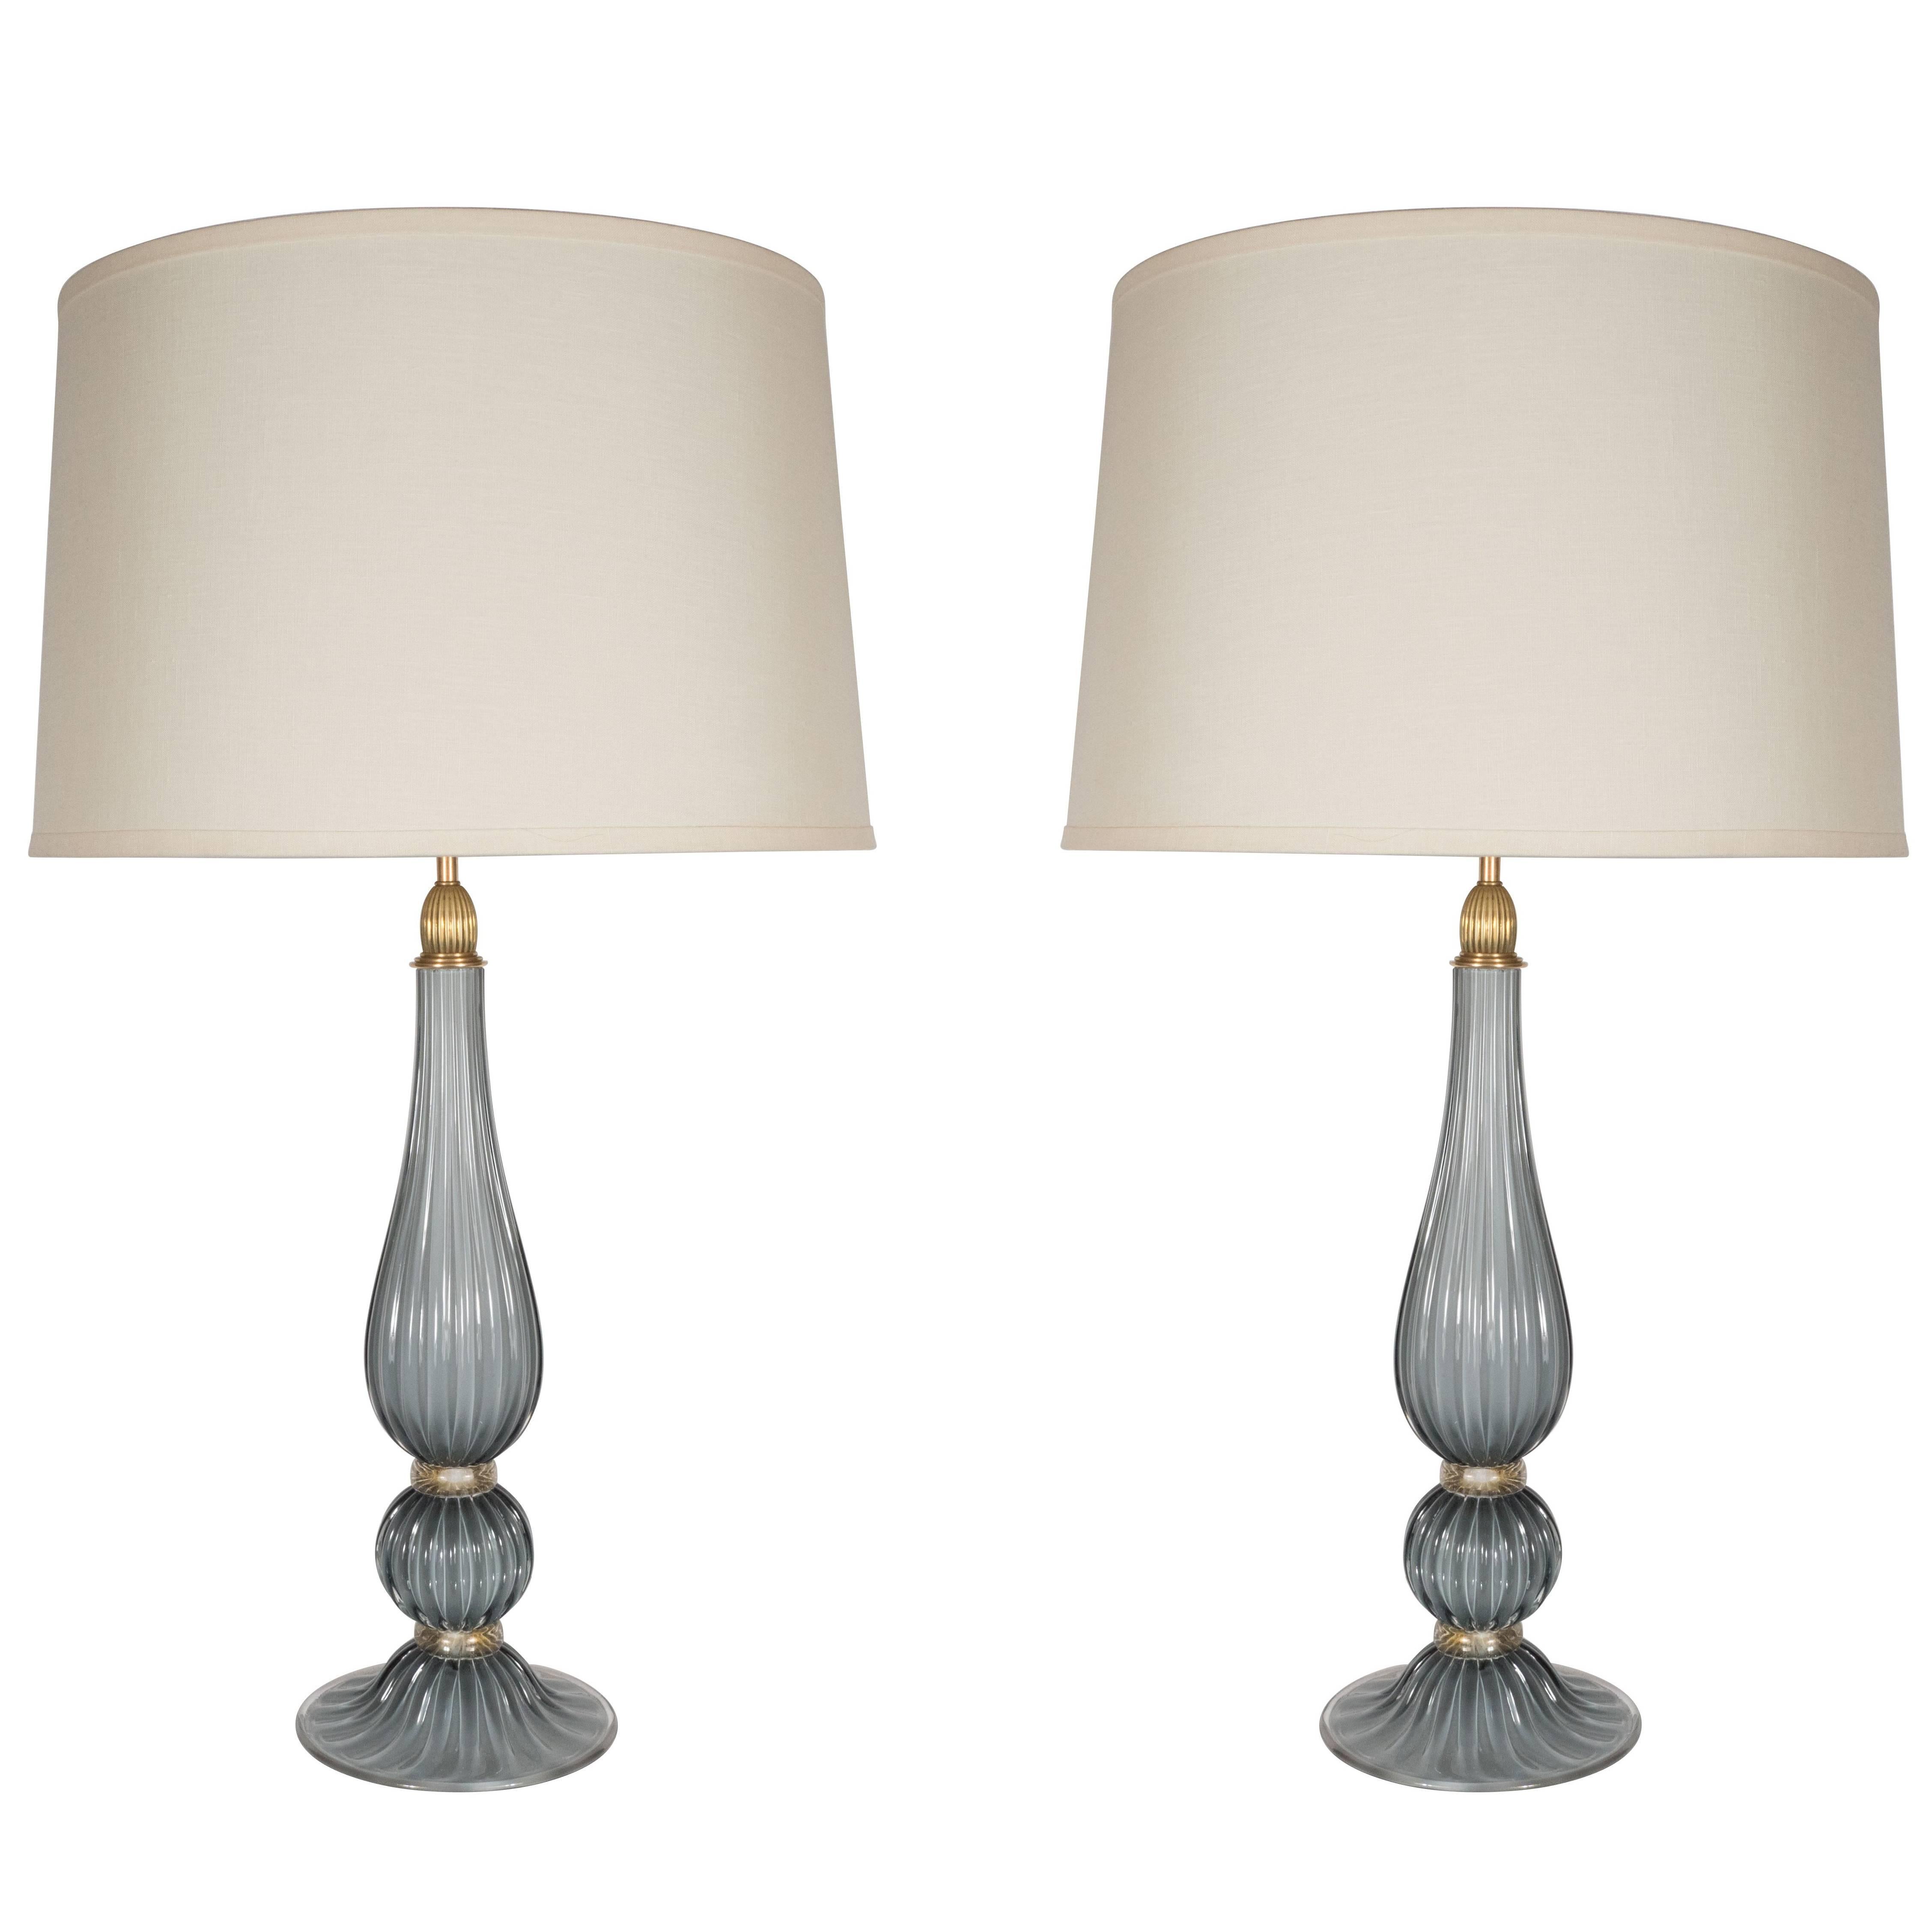 Pair of Handblown Modernist Murano Table Lamps in Gray Glass